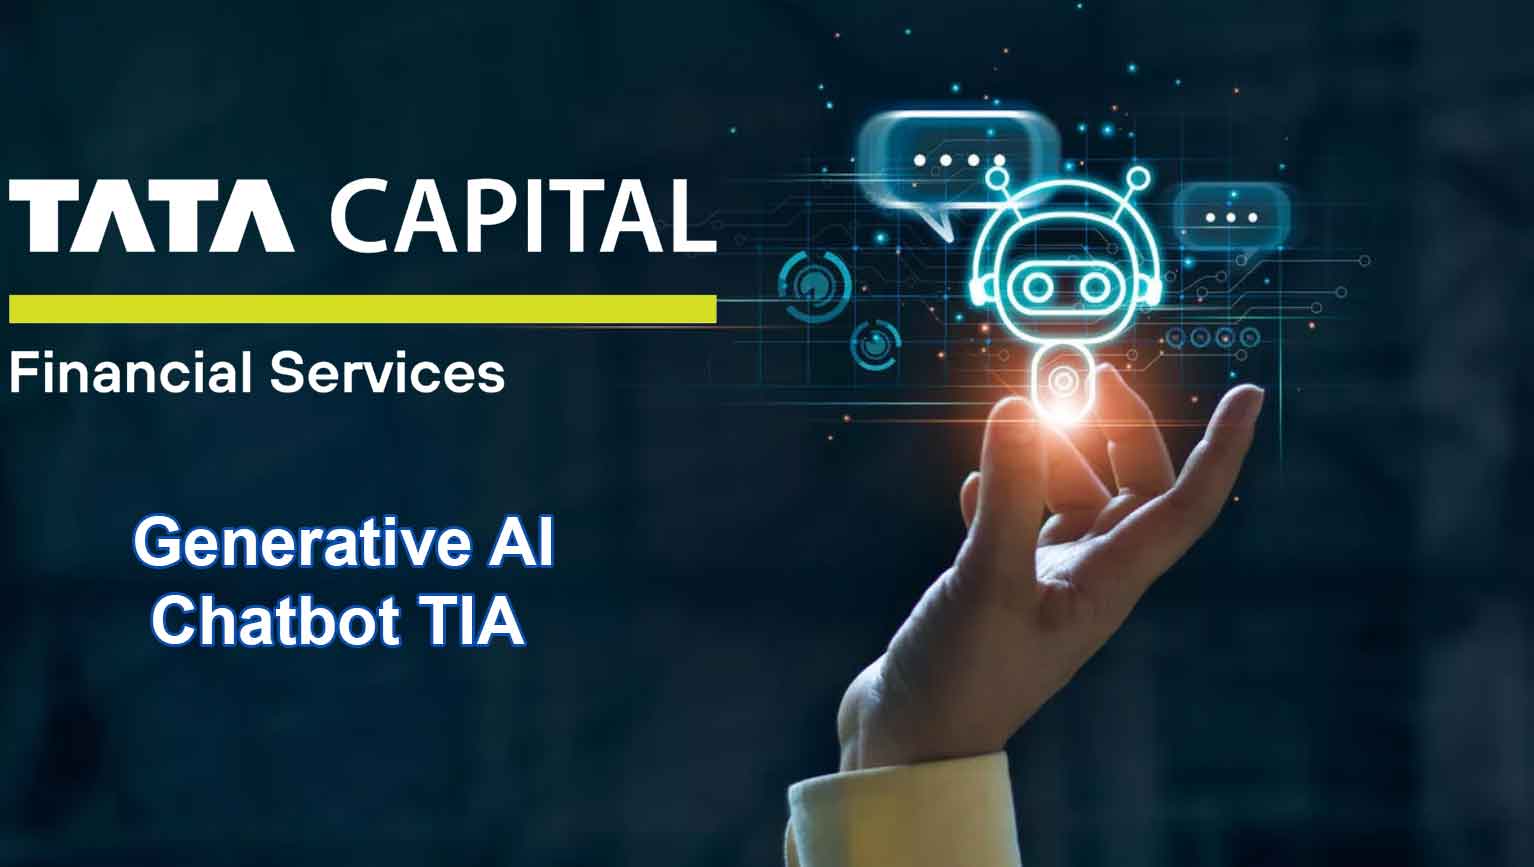 Tata Capital launches new version of its chatbot with Generative AI